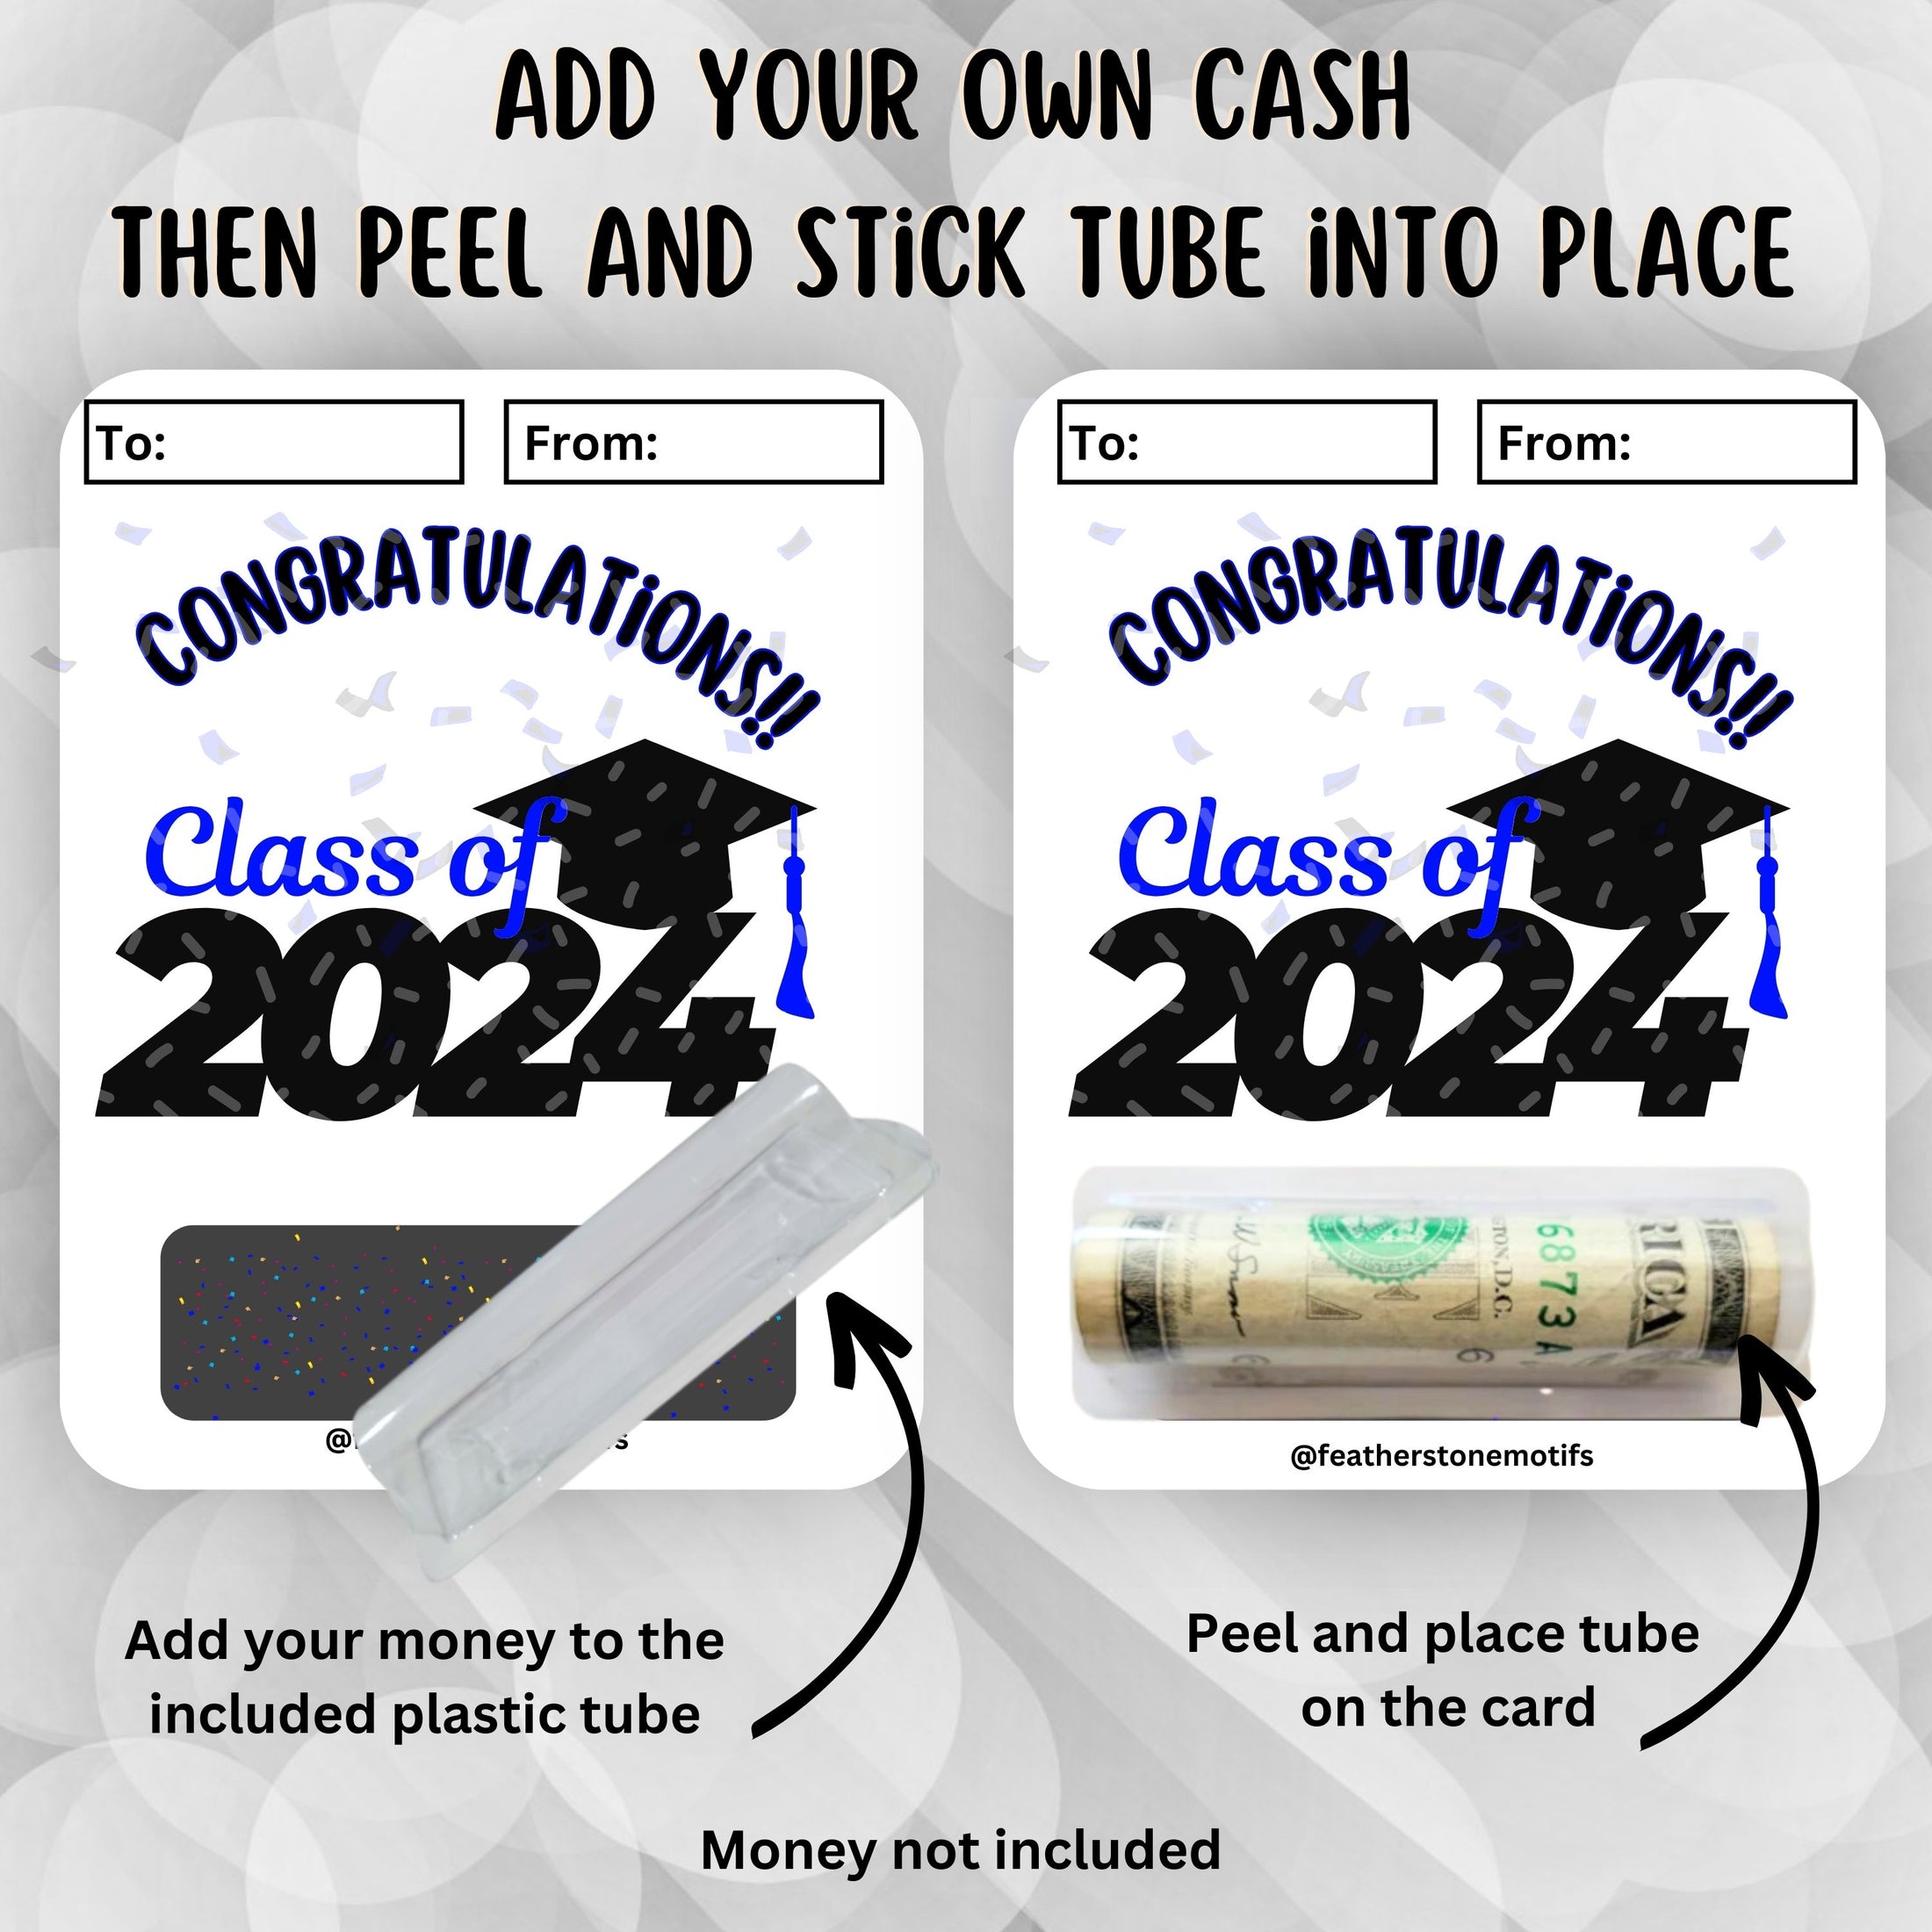 This image shows how to attach the money tube to the Class of 2024 Money Card.